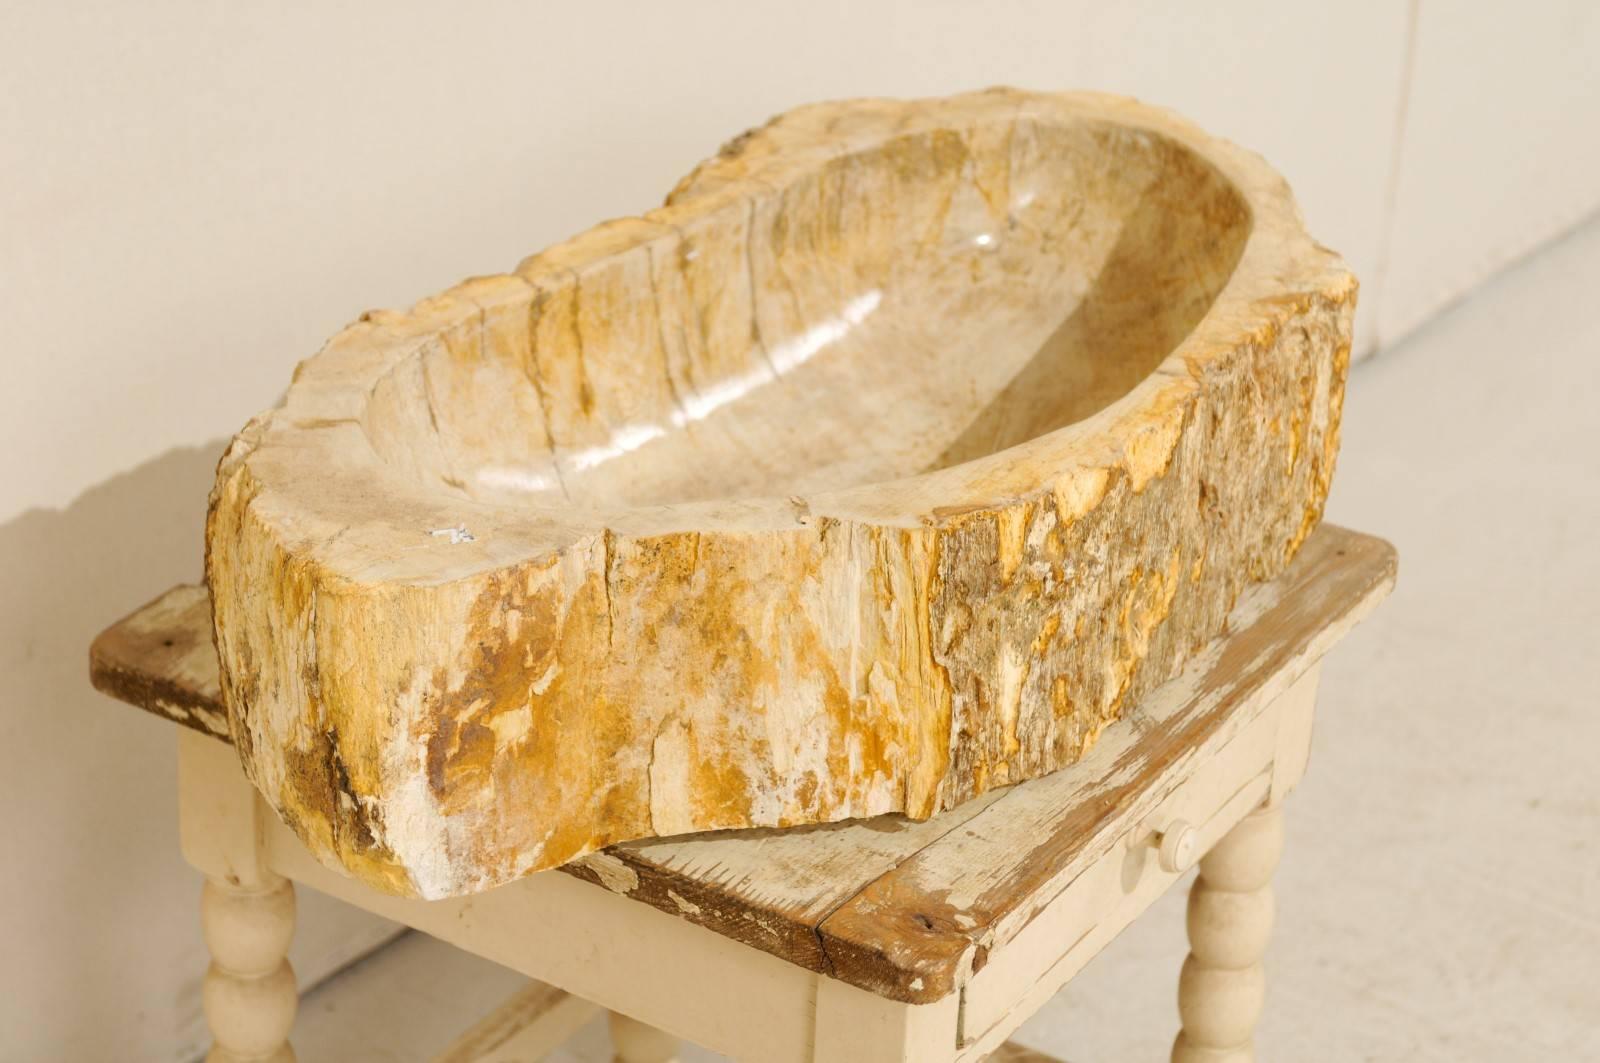 20th Century Polished Petrified Wood Sink with Rustic Oblong Shape in Warm Cream & Beige